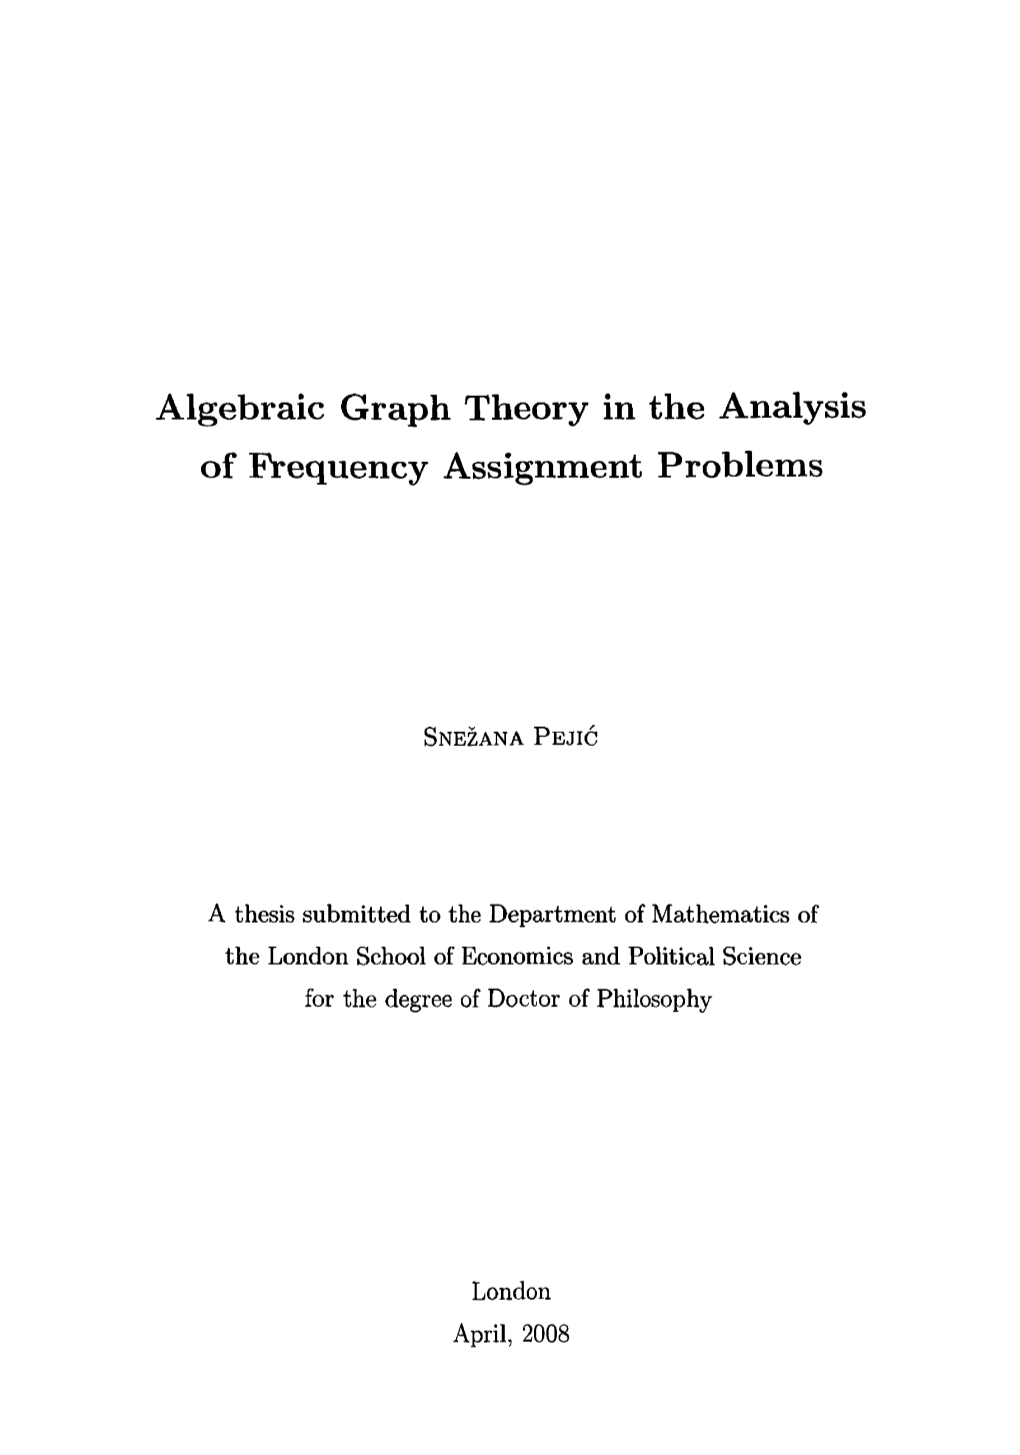 Algebraic Graph Theory in the Analysis of Frequency Assignment Problems